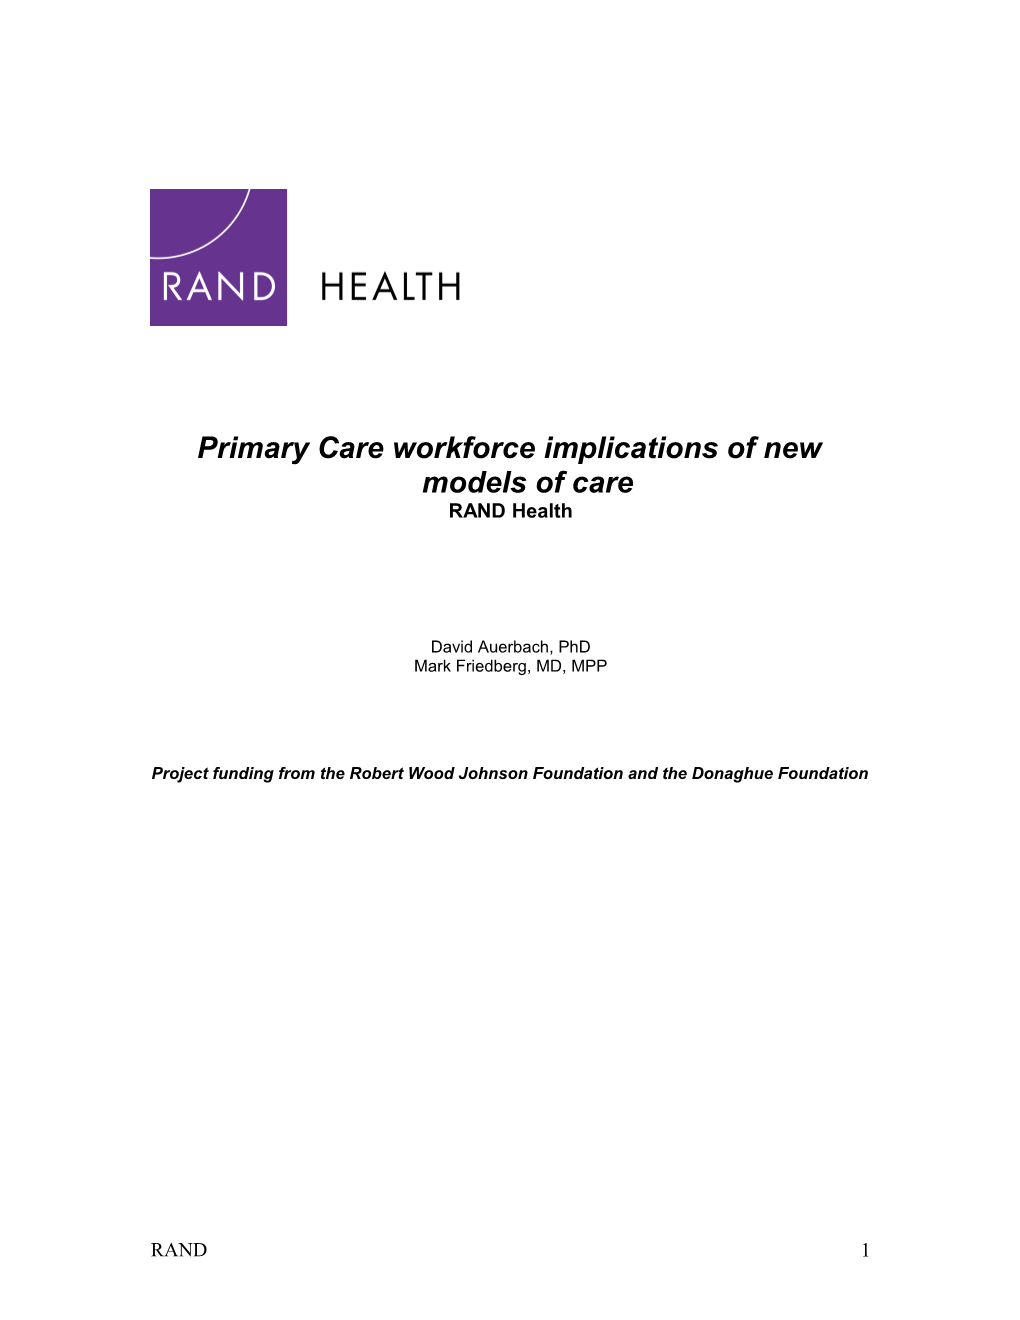 Primary Care Workforce Implications of New Models of Care